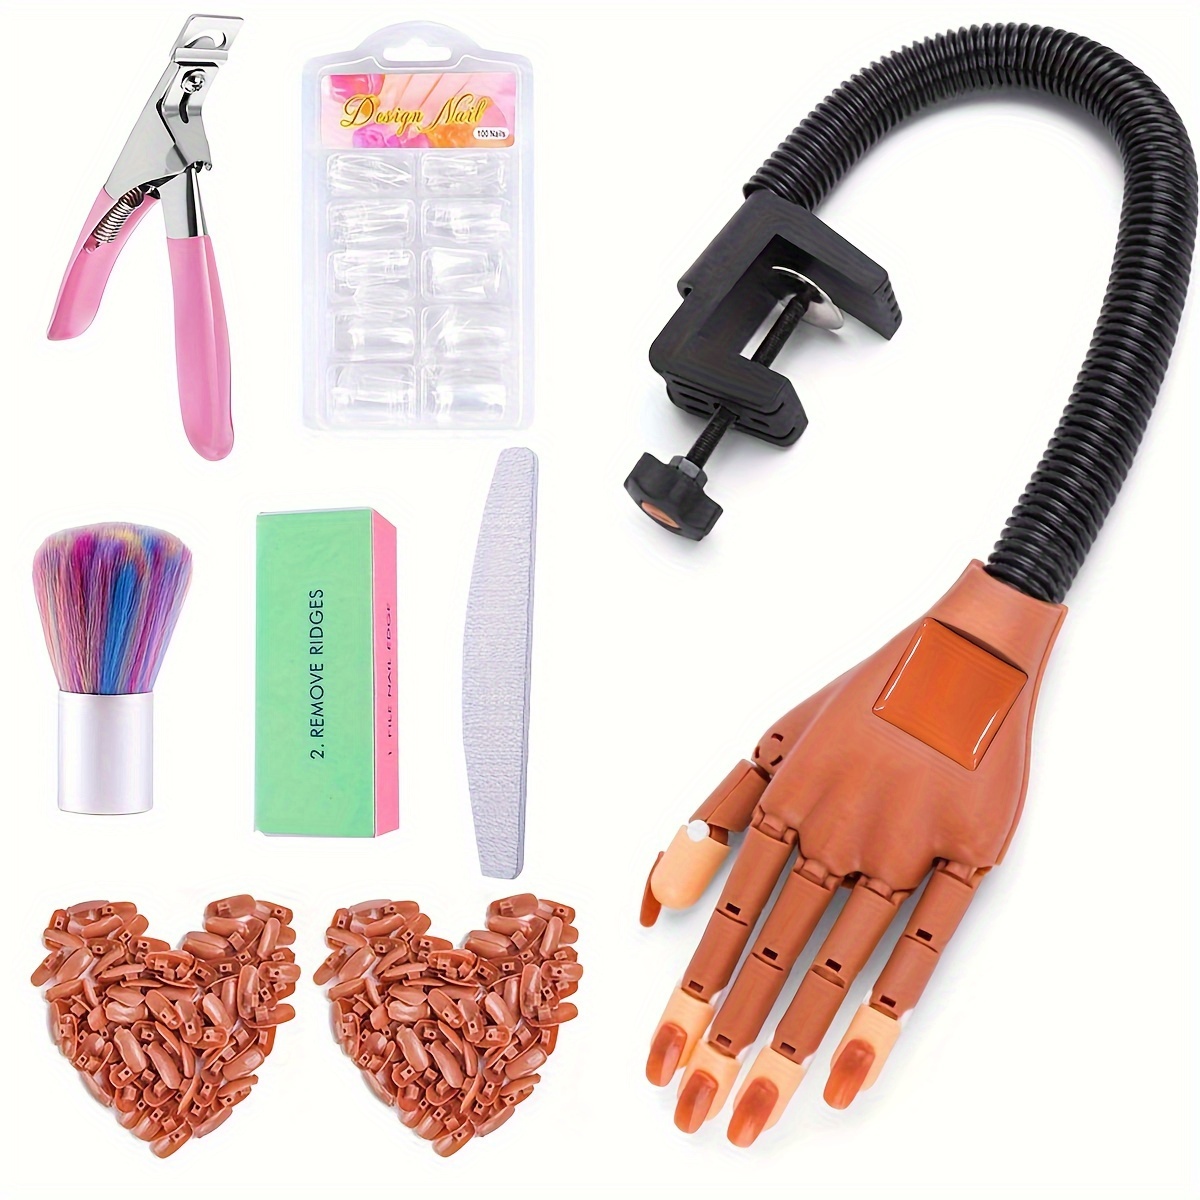 

Practice Hand For Acrylic Nails, Flexible Moveable Nail Training Hand Kits, False Mannequin Hands With Fake Nail Tips, Nail Files And Clipper